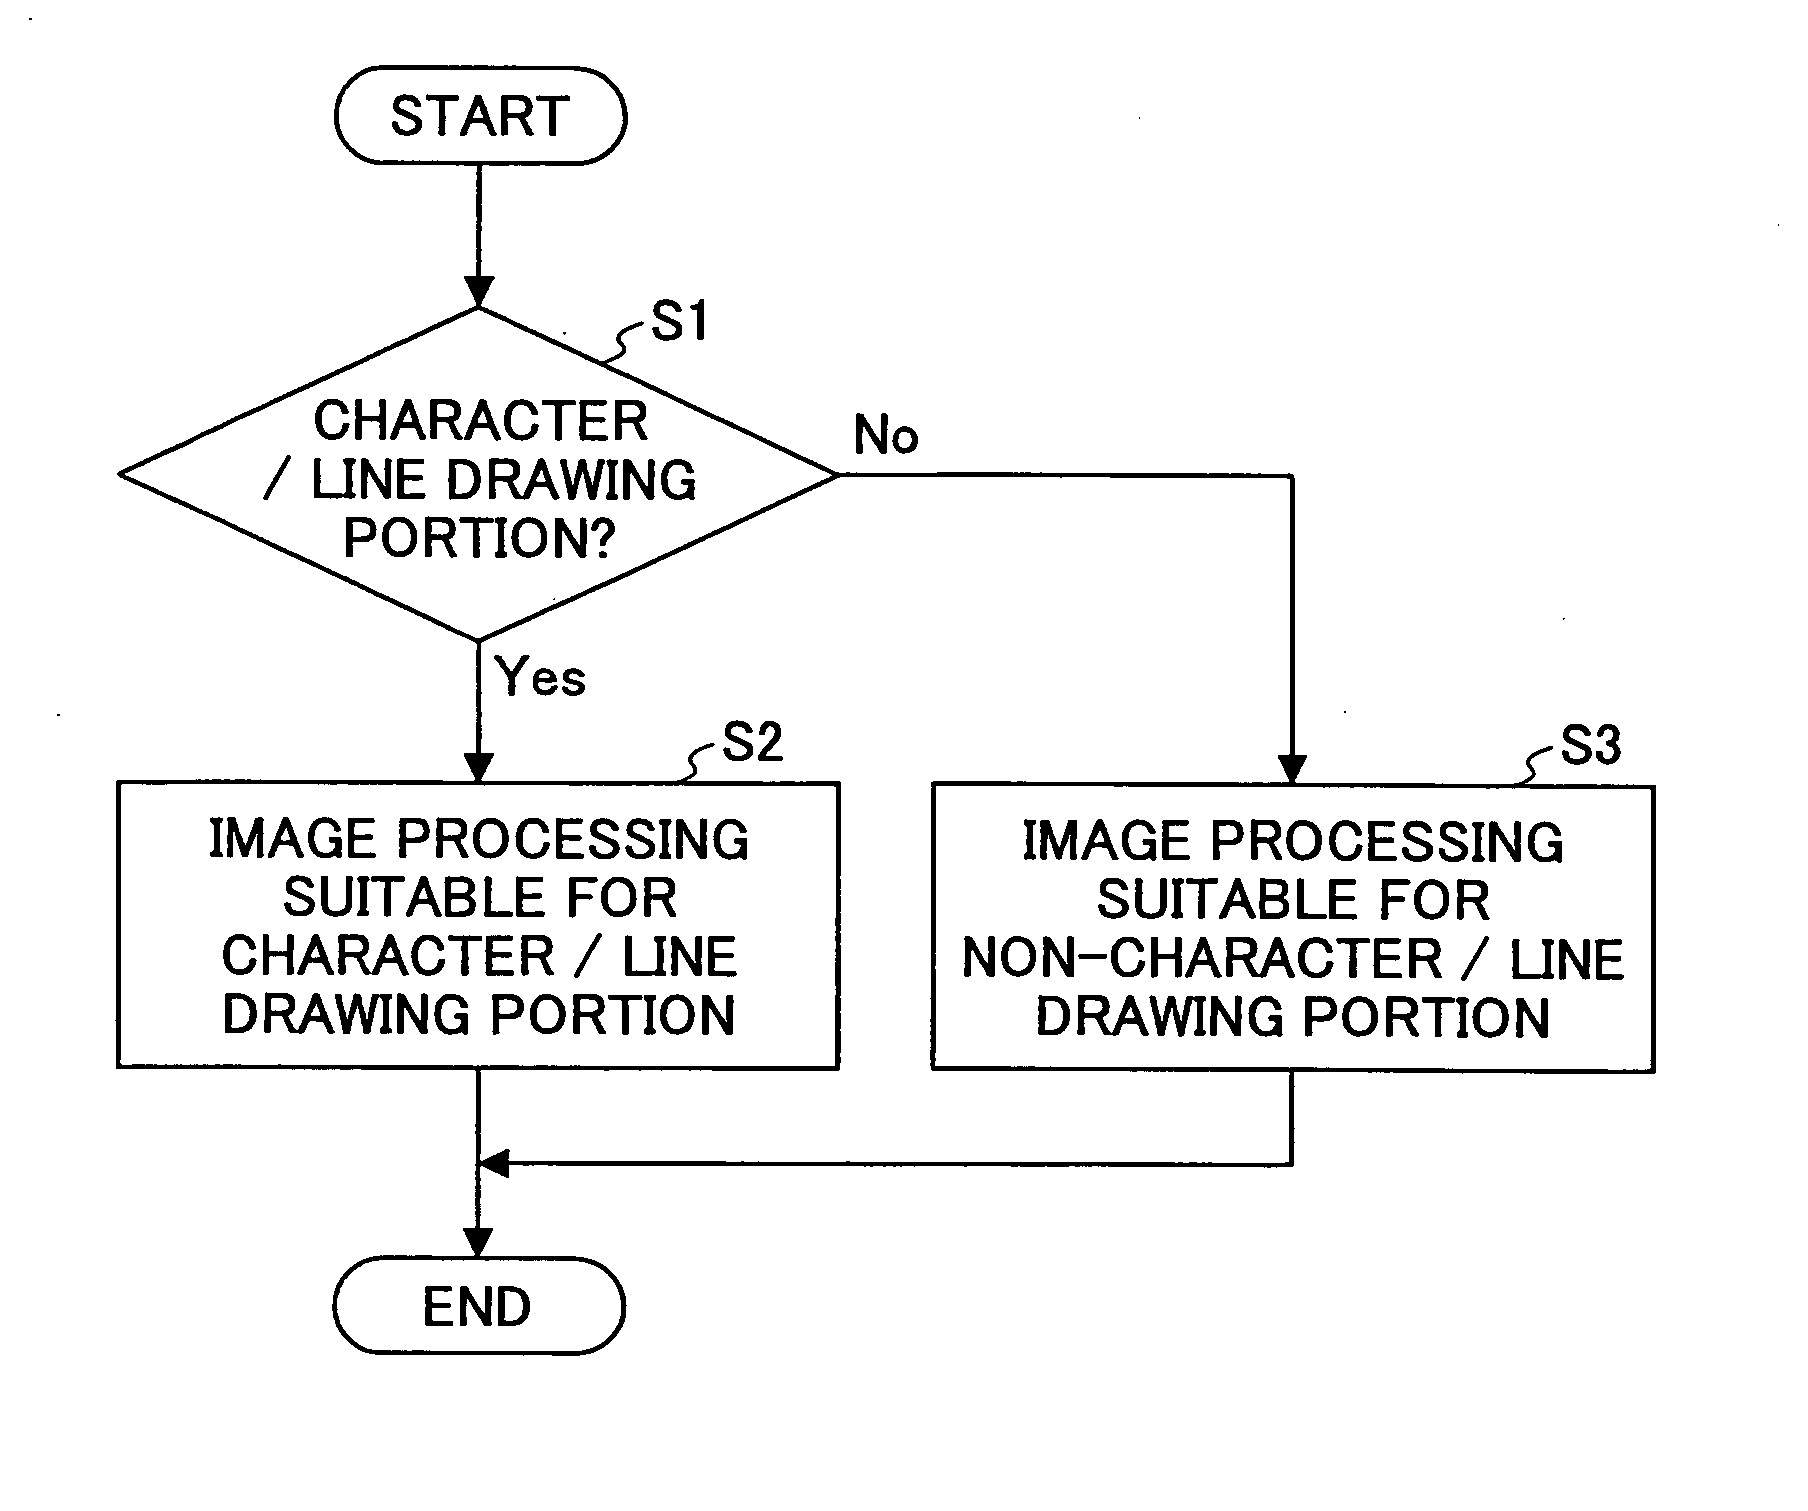 Image processing apparatus, an image forming apparatus and an image processing method